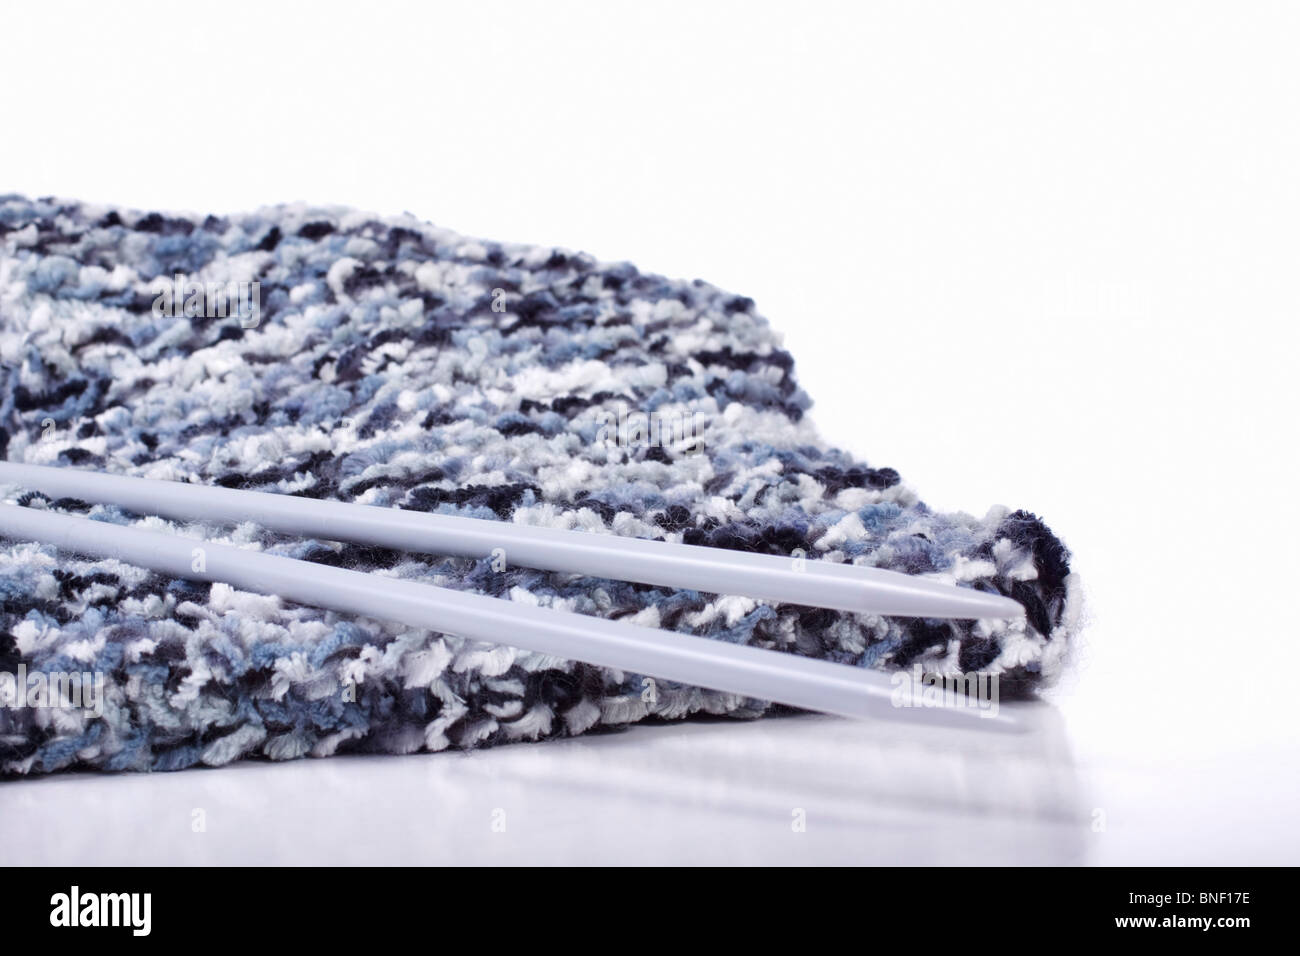 Black and grey variegated yarn scarf and knitting needles. Isolated. Stock Photo